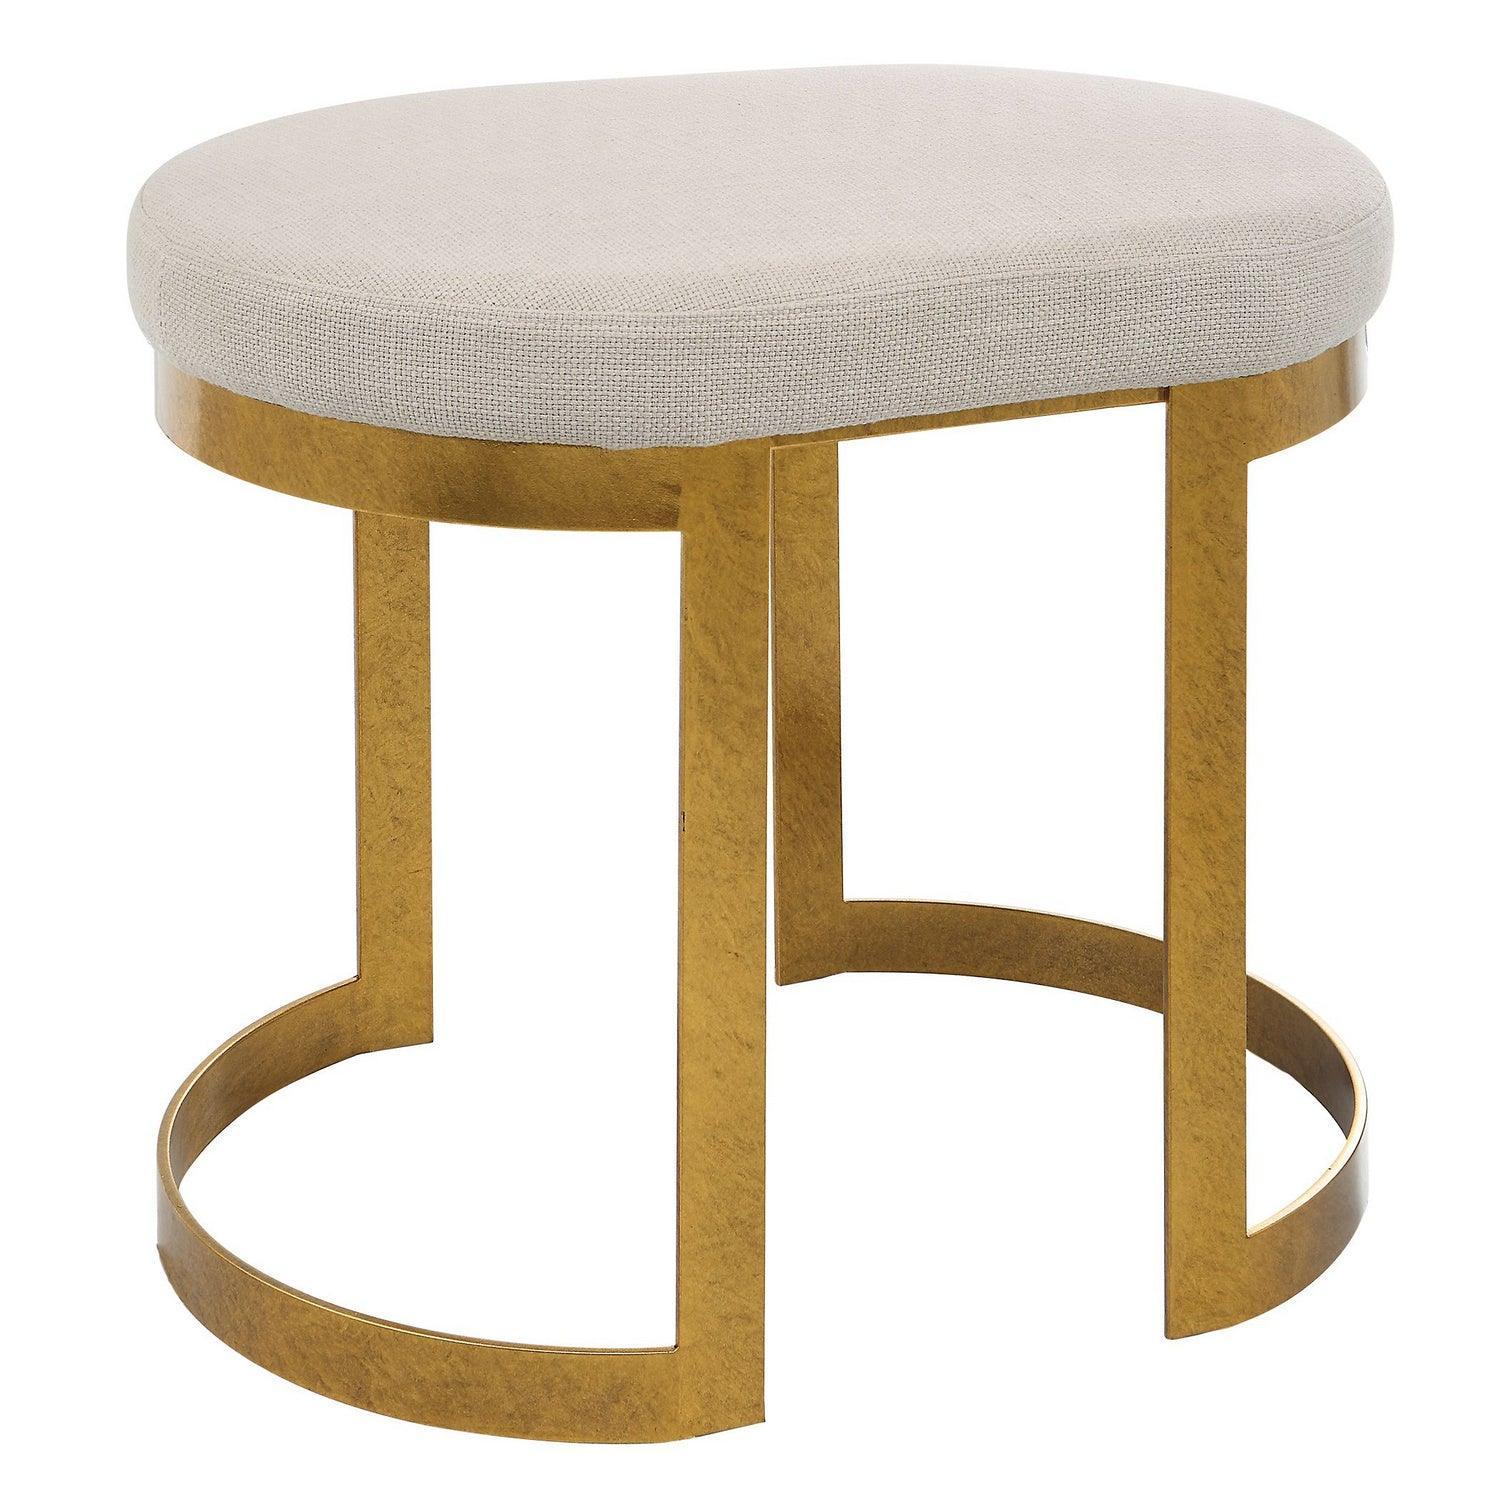 The Uttermost - Infinity Accent Stool - 23698 | Montreal Lighting & Hardware